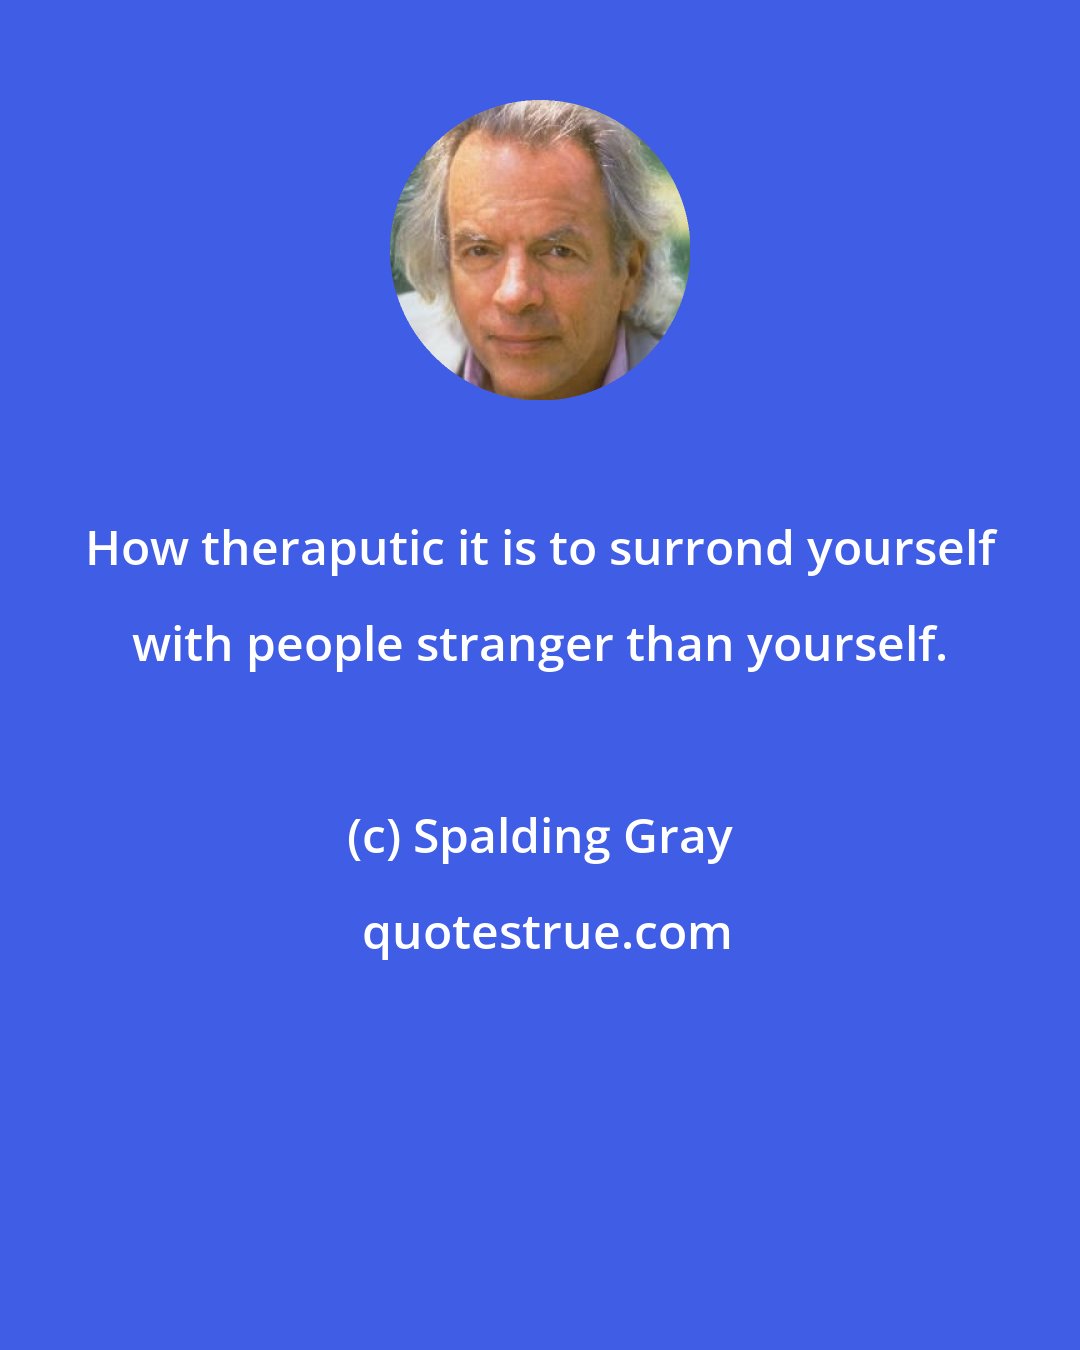 Spalding Gray: How theraputic it is to surrond yourself with people stranger than yourself.